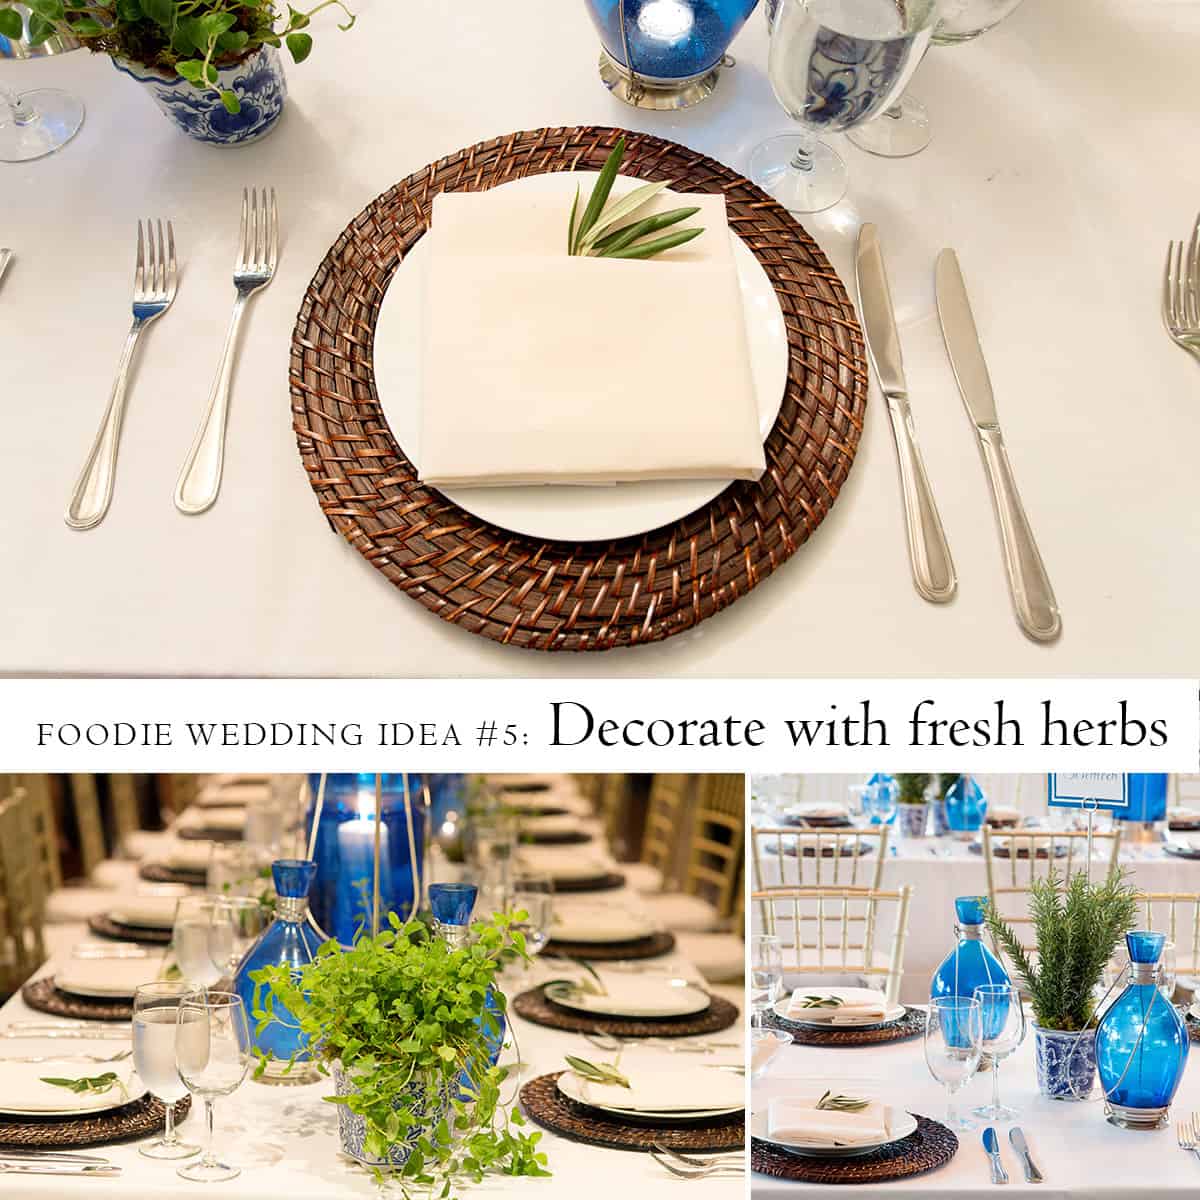 Foodie wedding idea: decorate with fresh herbs. Rosemary, oregano, and thyme table decor photographed by Kyo Morishima